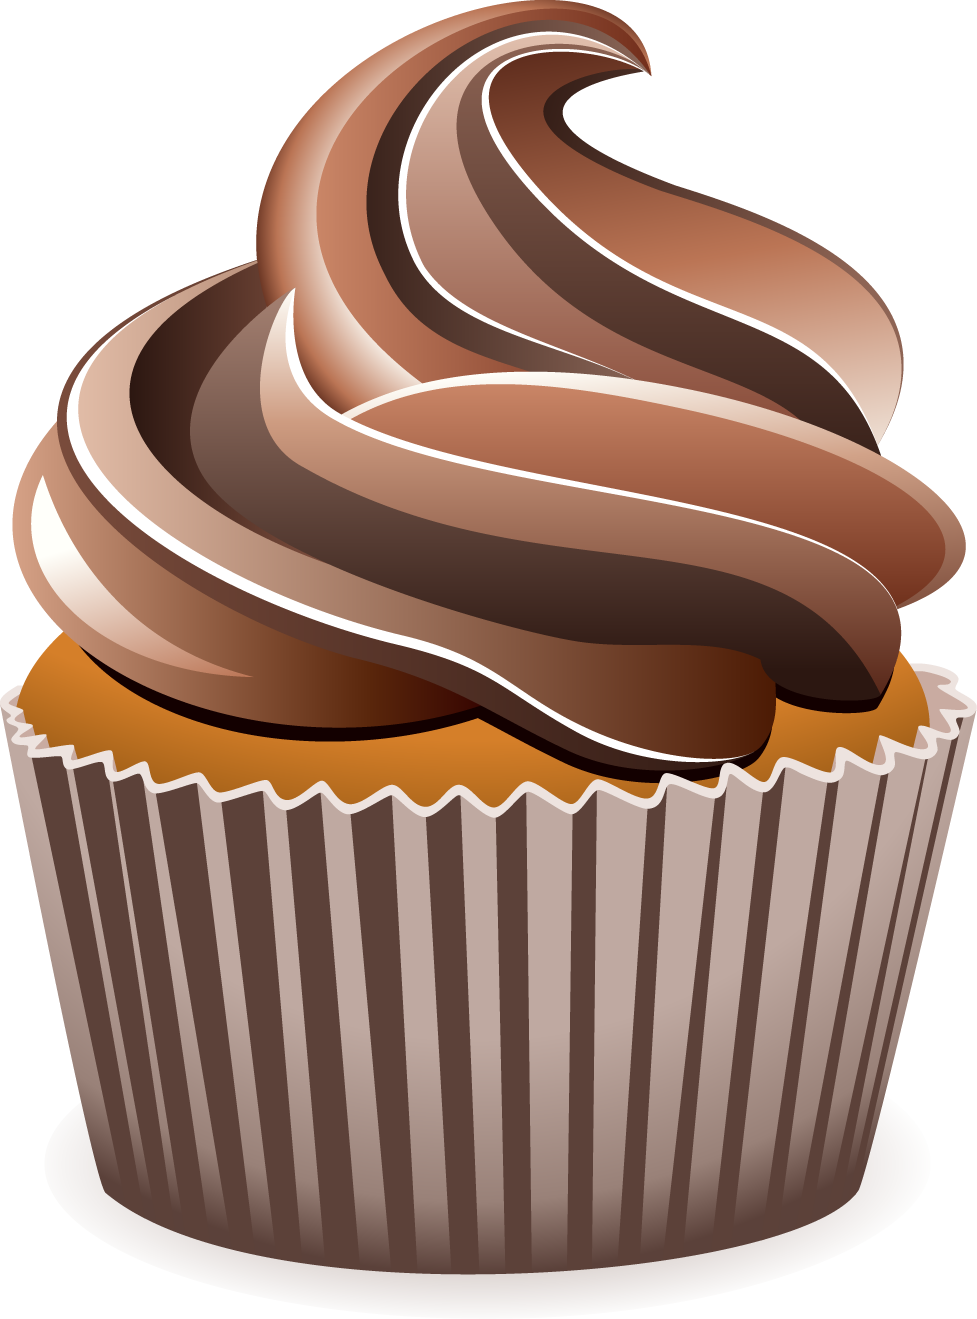 Cupcake clipart free download free clipart images 3 Clipartix